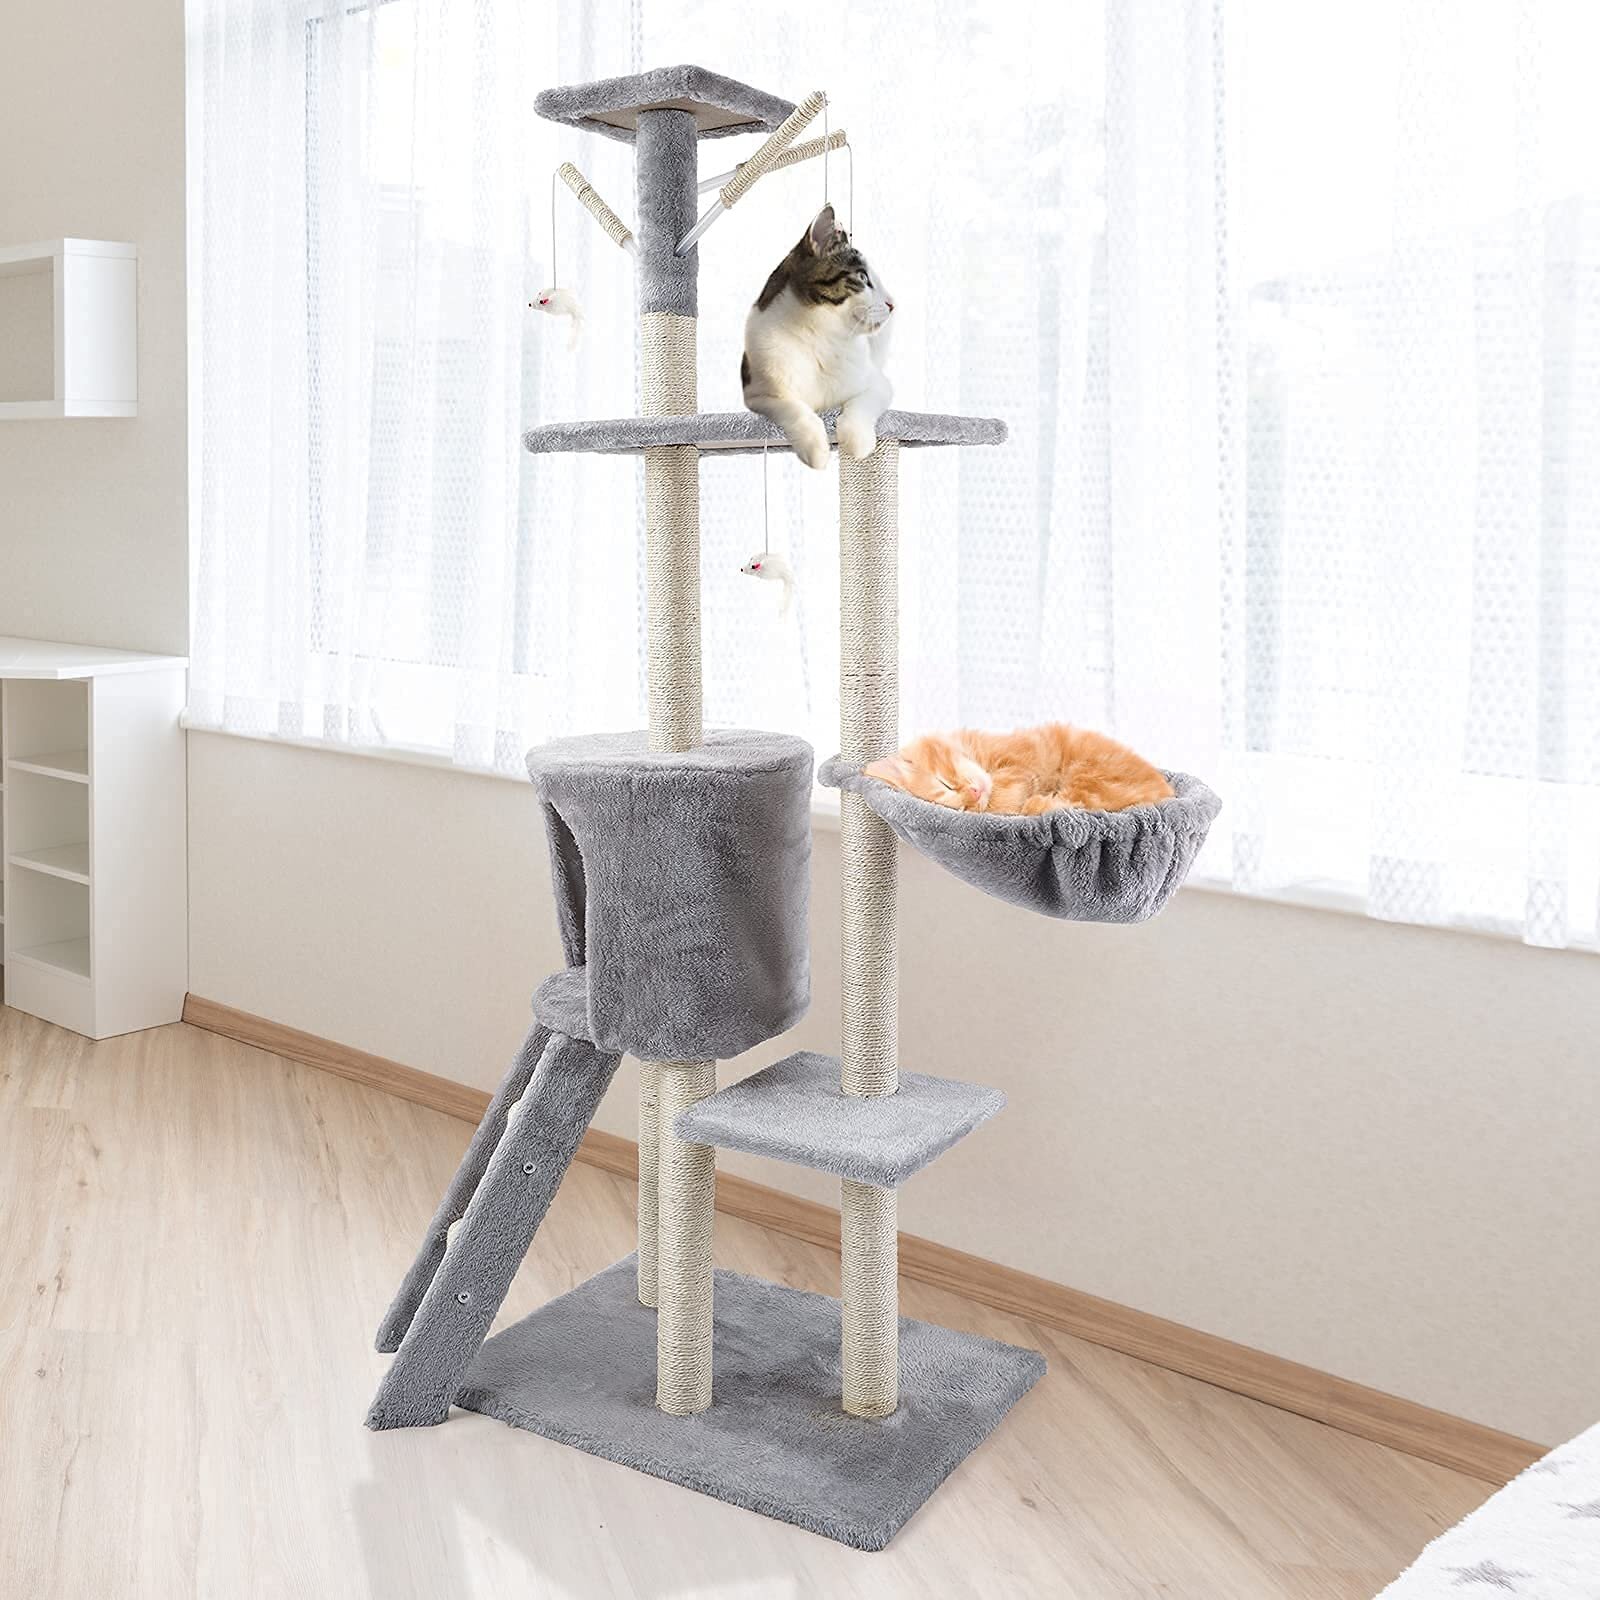 50" Brown Pet Cat Tree Play House Tower Condo Bed cratching Post Toy Muiti level 